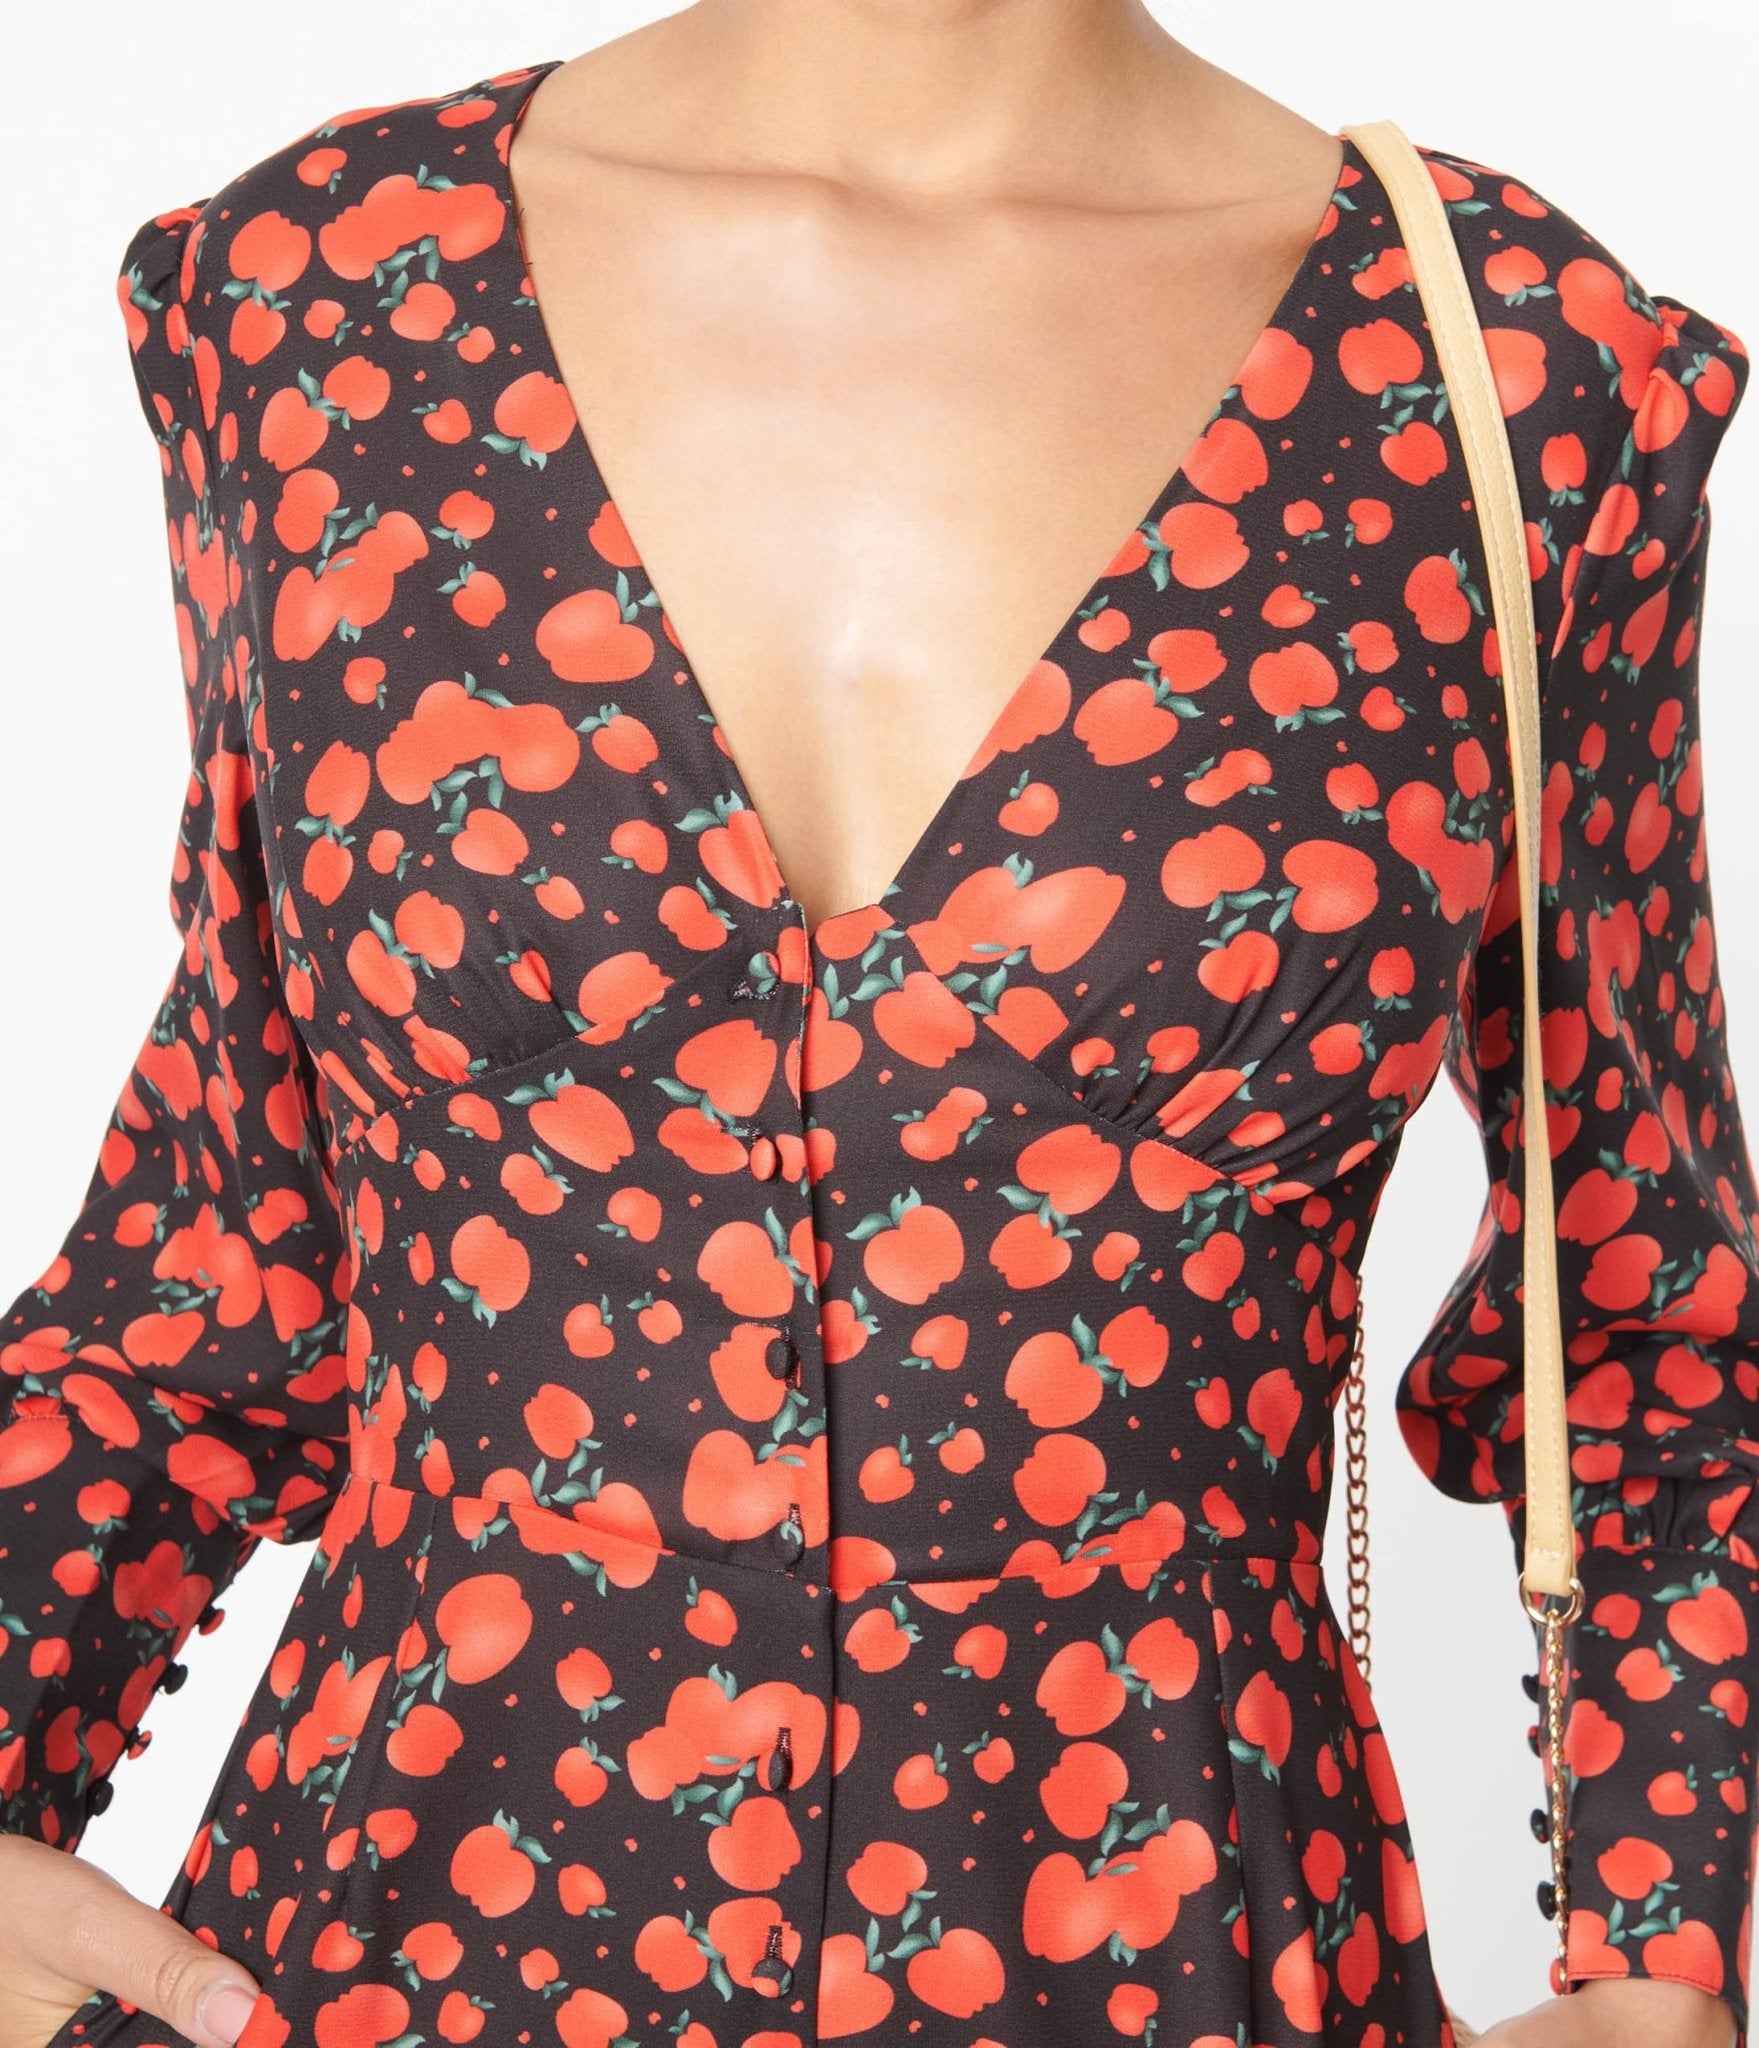 Black & Red Apple Print Marina Jumpsuit - Unique Vintage - Womens, BOTTOMS, ROMPERS AND JUMPSUITS